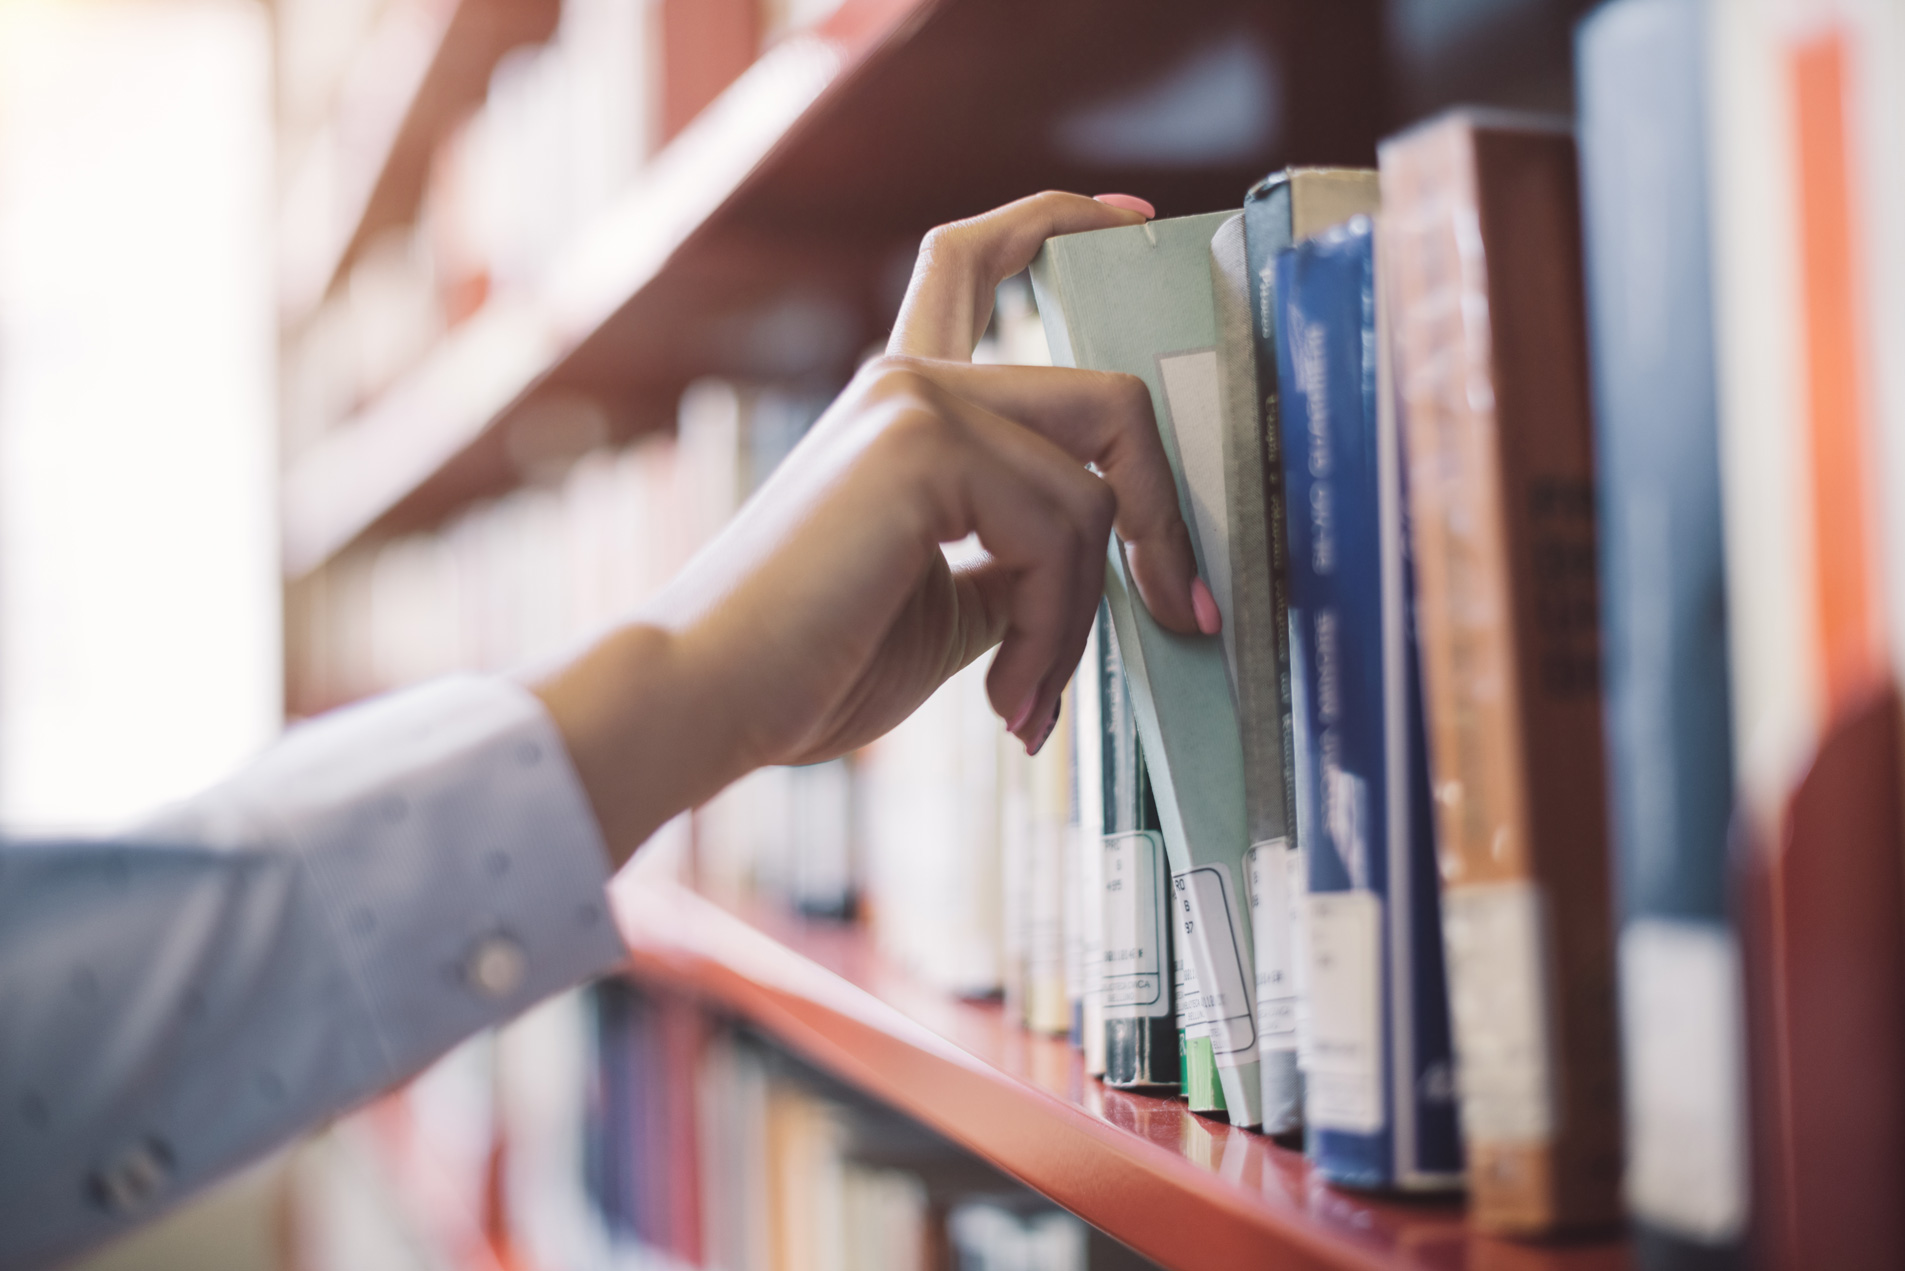 A woman's hand in a library pulling a library book off the shelf